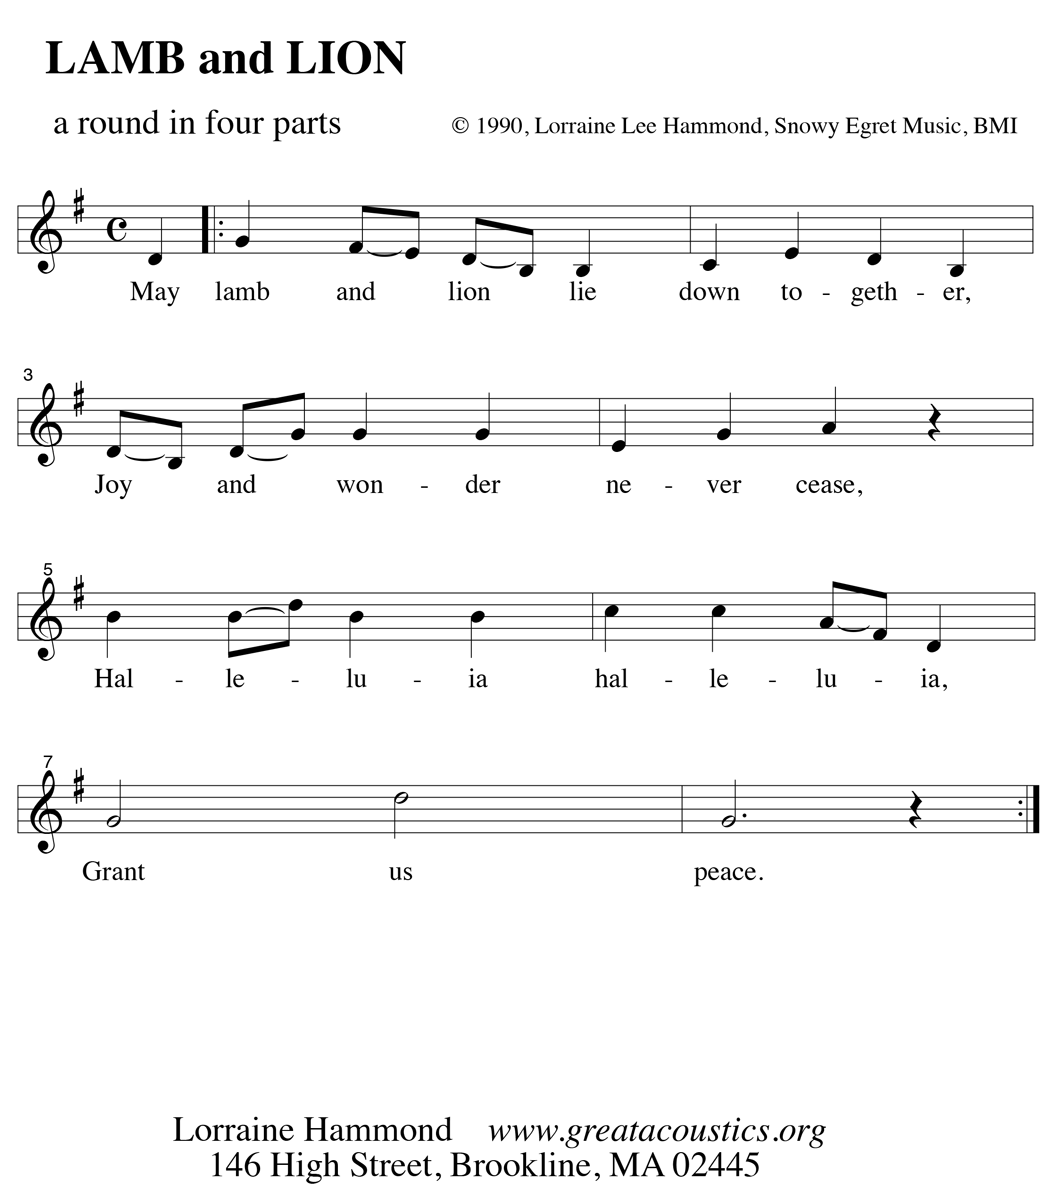 Lamb and Lion tune notation